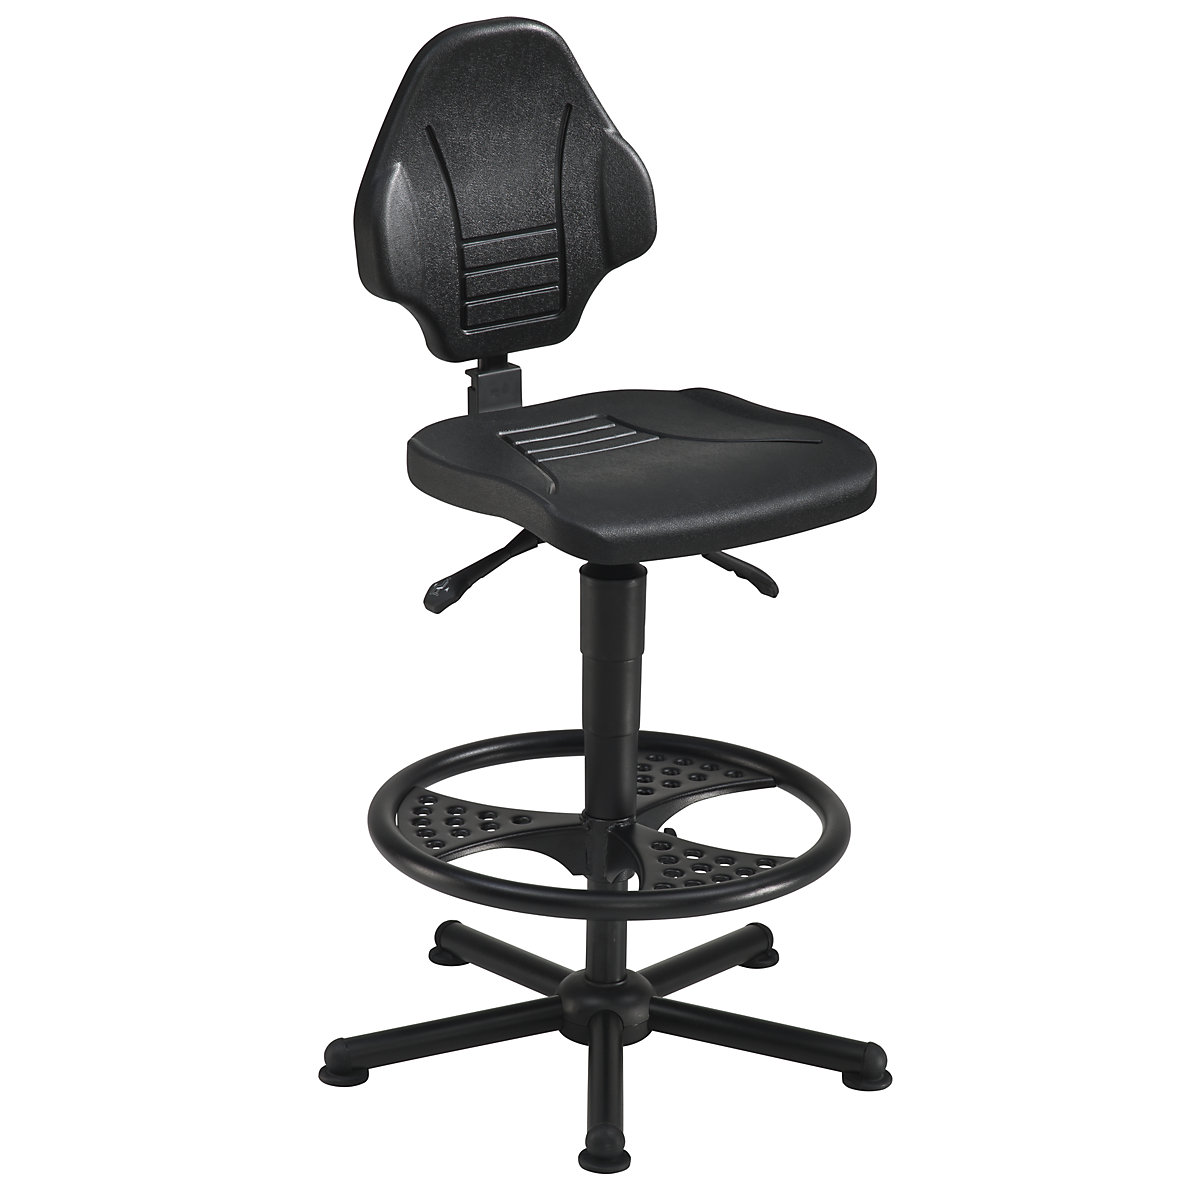 Heavy duty industrial swivel chair – meychair, max. load 160 kg, with floor glides and foot ring, height adjustment range 590 – 840 mm-4